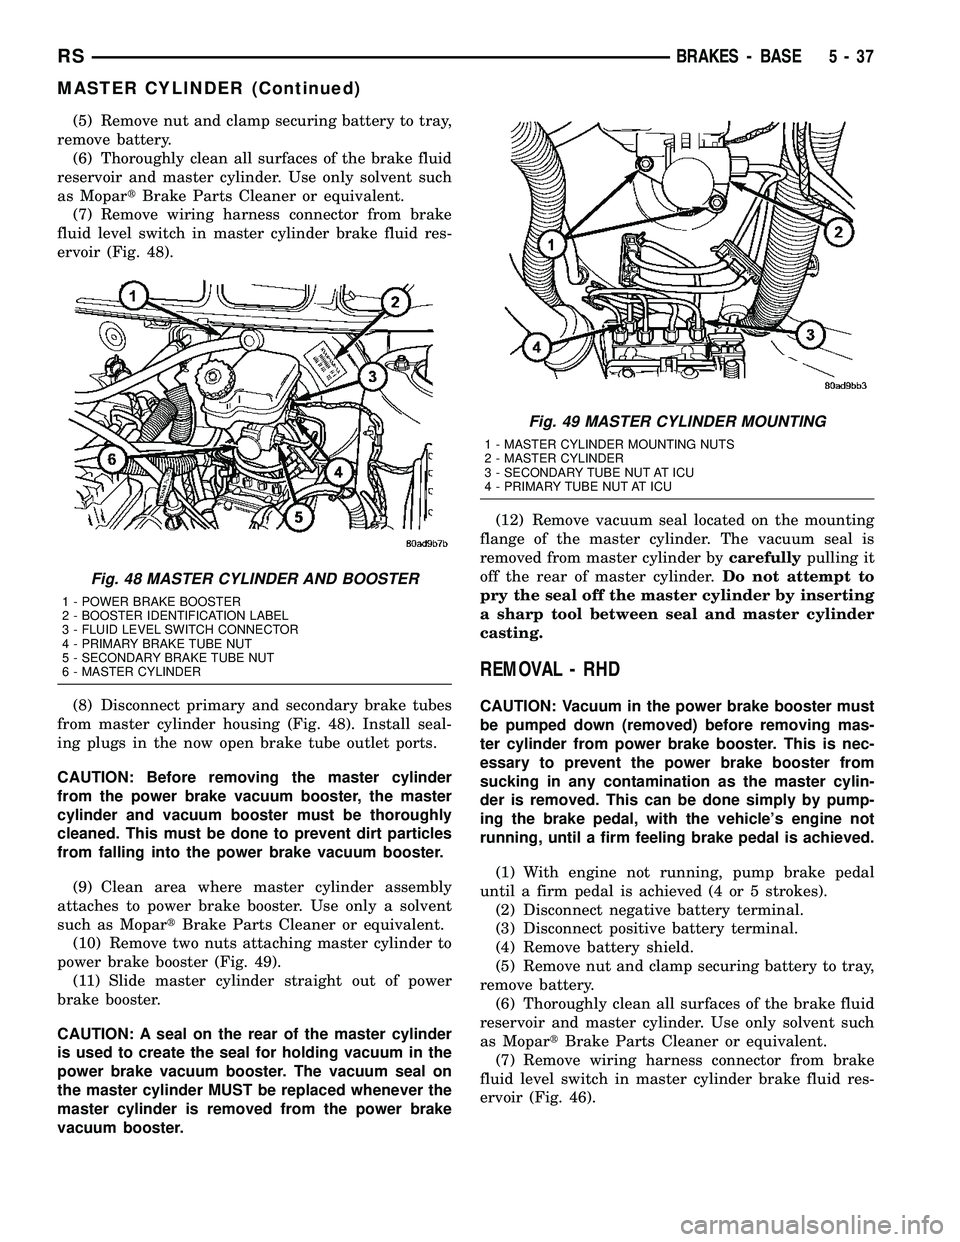 CHRYSLER VOYAGER 2005  Service Manual (5) Remove nut and clamp securing battery to tray,
remove battery.
(6) Thoroughly clean all surfaces of the brake fluid
reservoir and master cylinder. Use only solvent such
as MopartBrake Parts Cleane